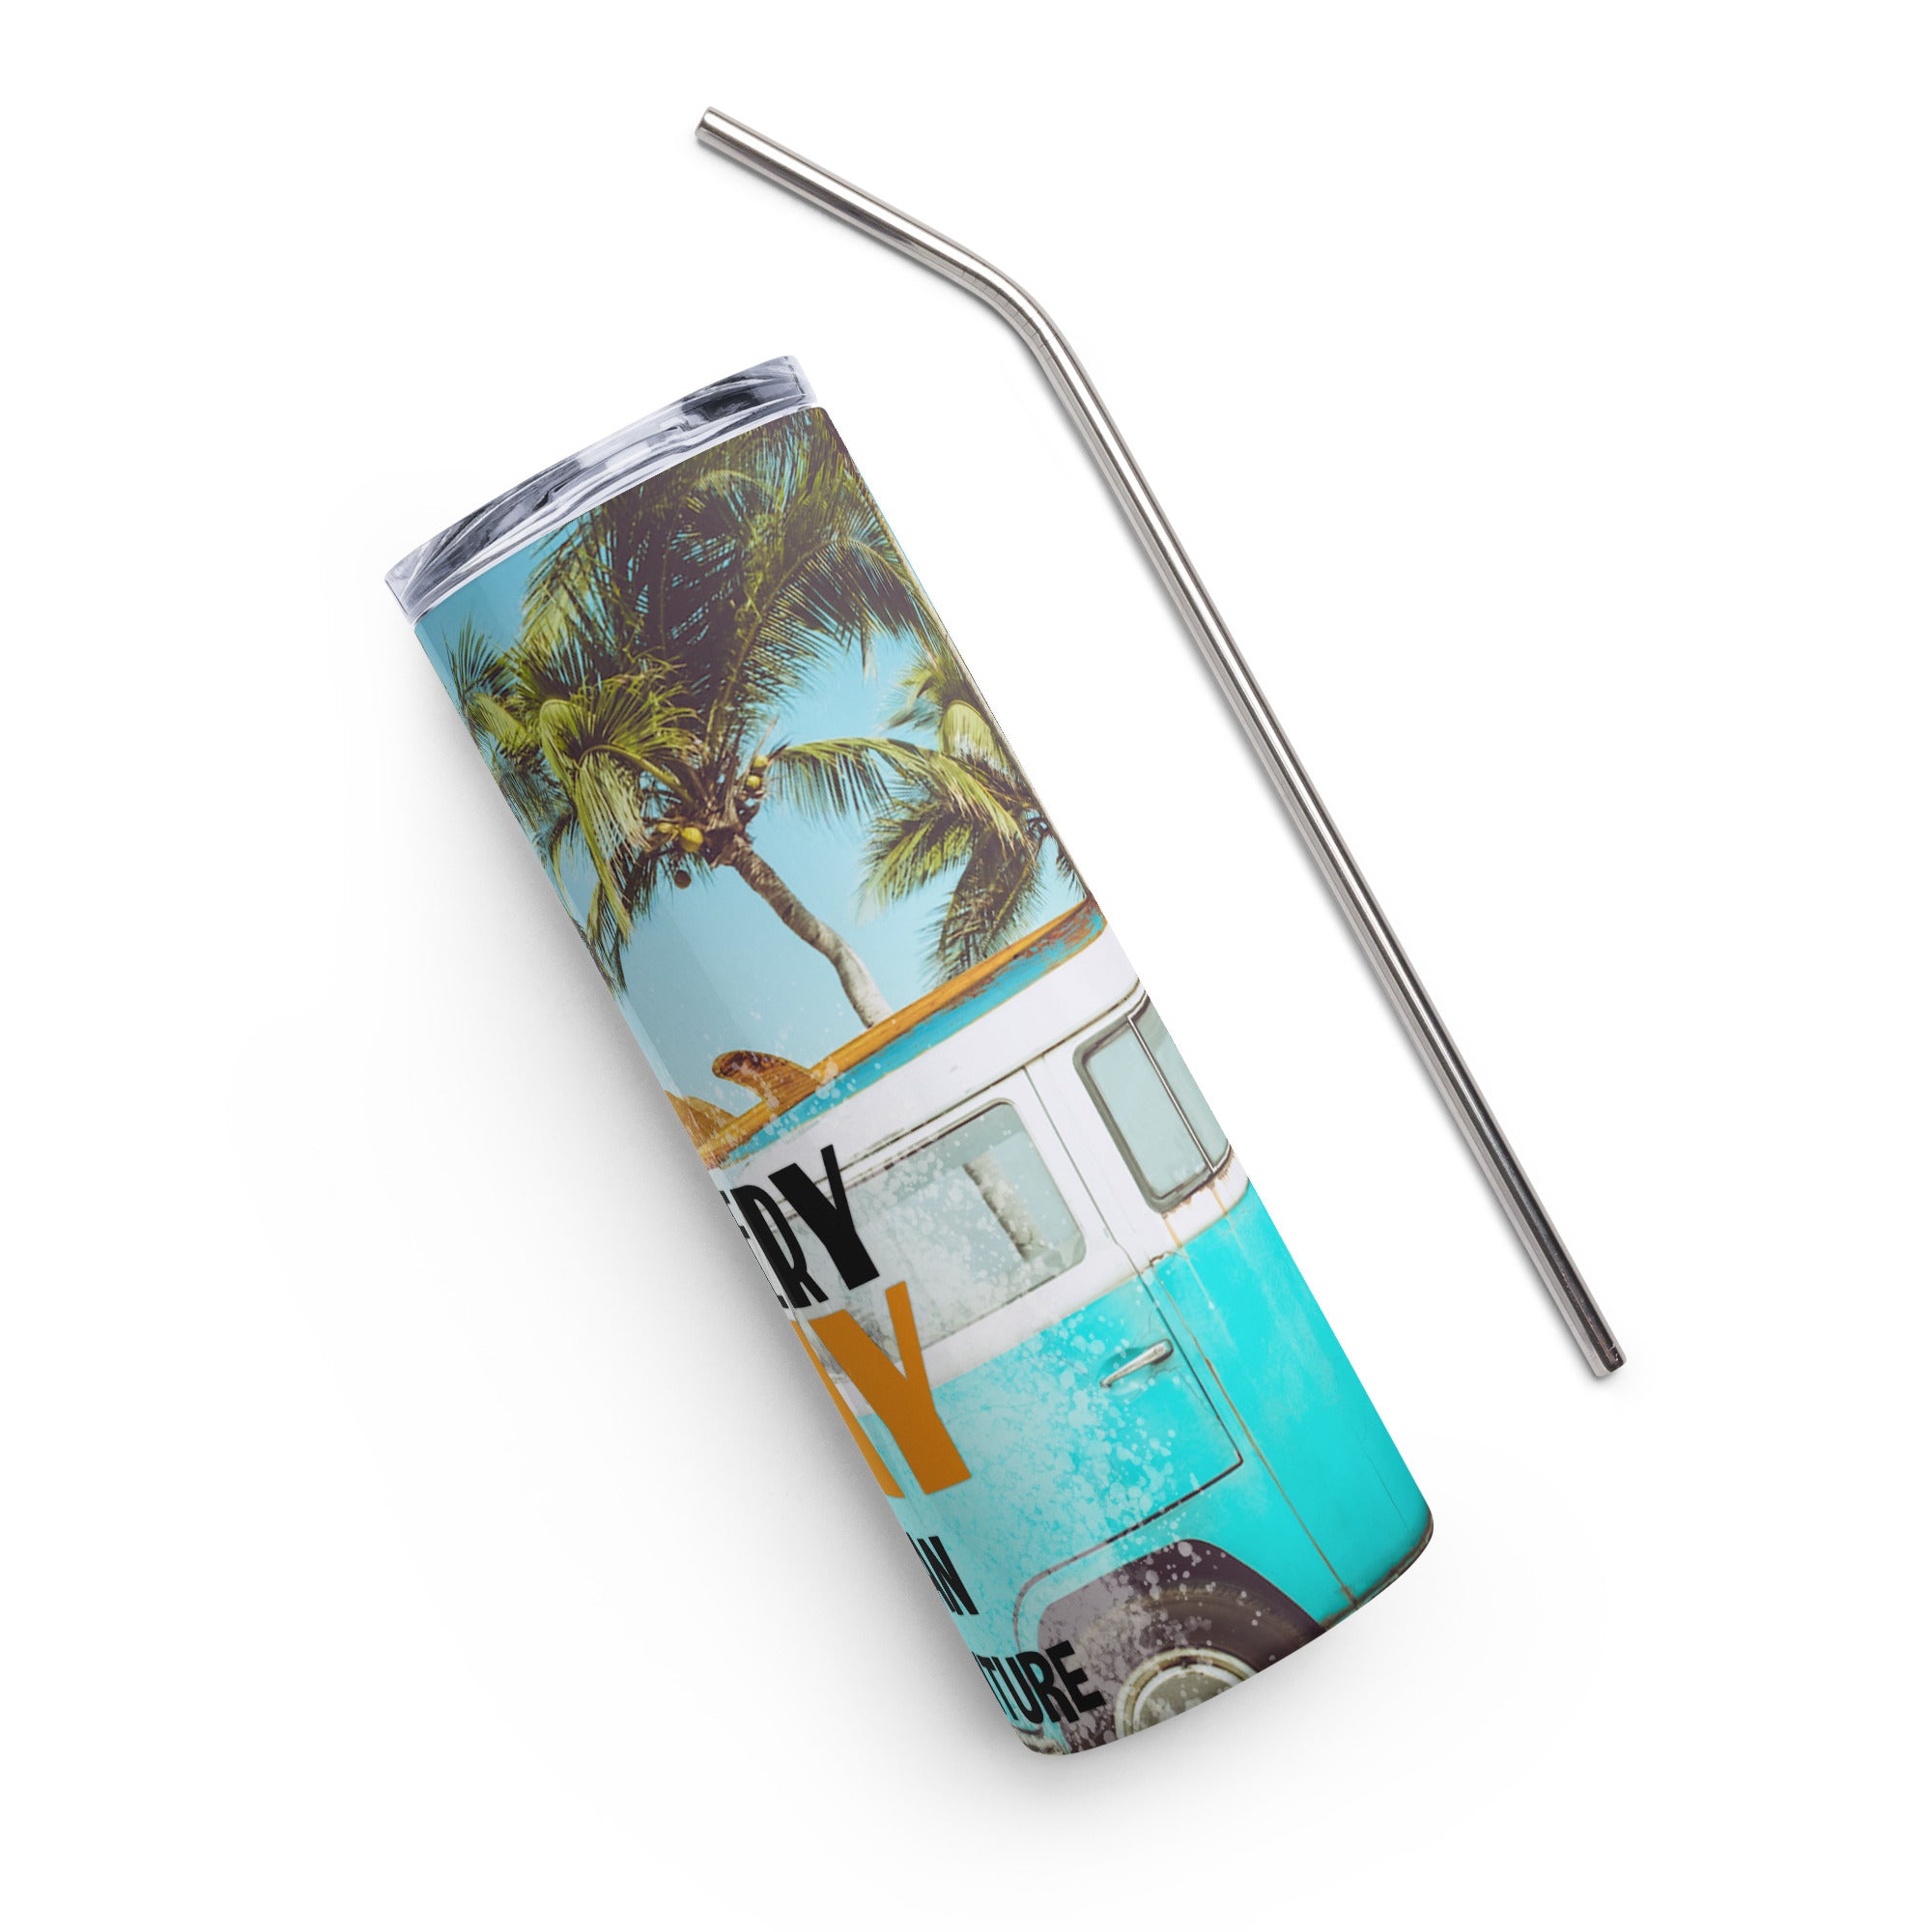 Everyday is an Adventure - Stainless Steel Tumbler